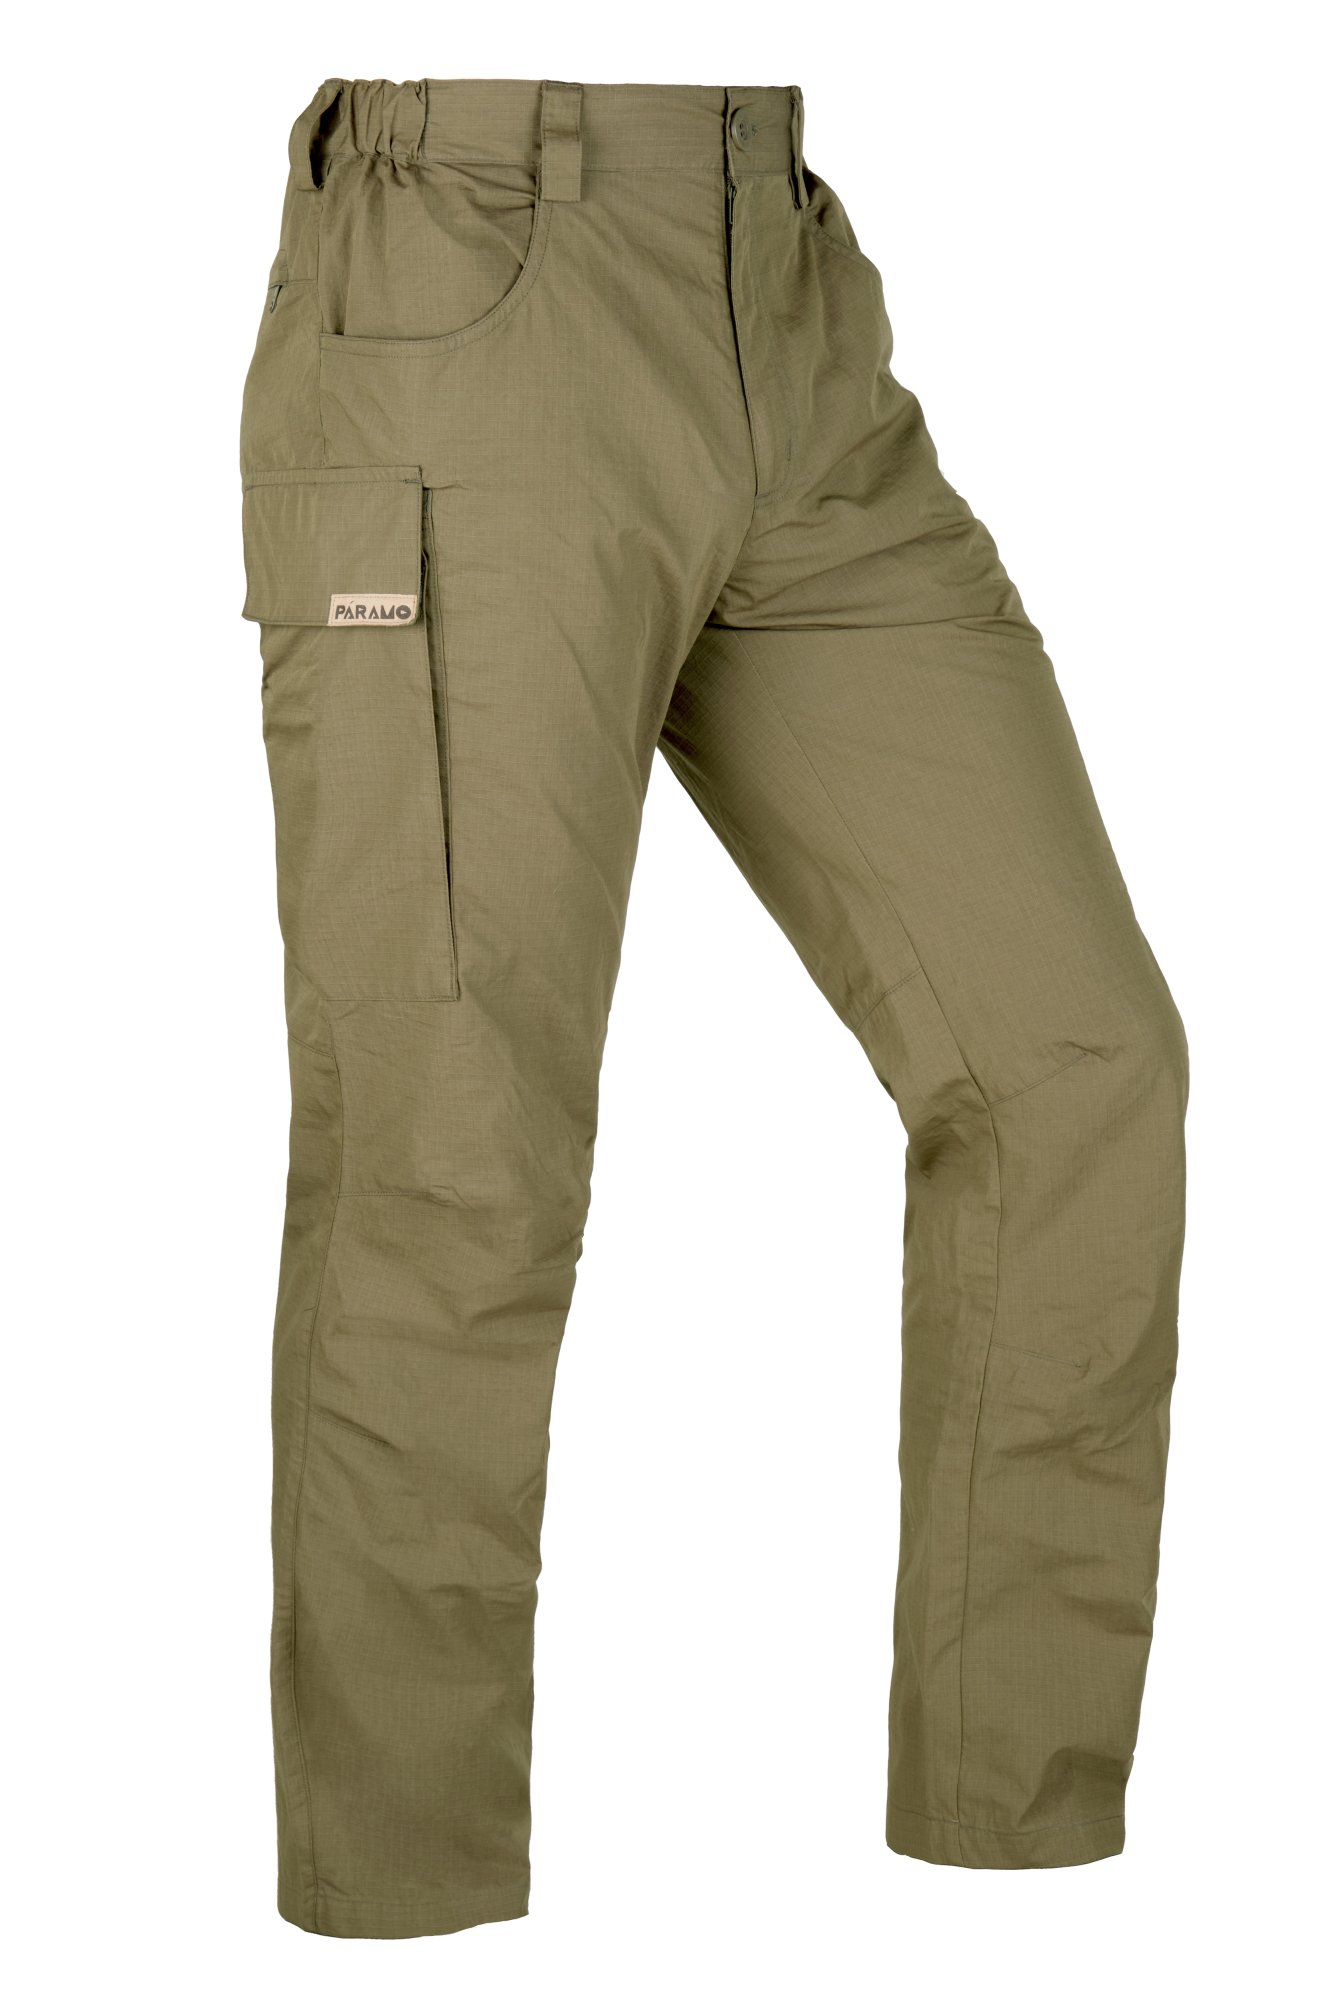 Buy a Paramo Men's Maui Trousers from The Mountaineer, Paramo